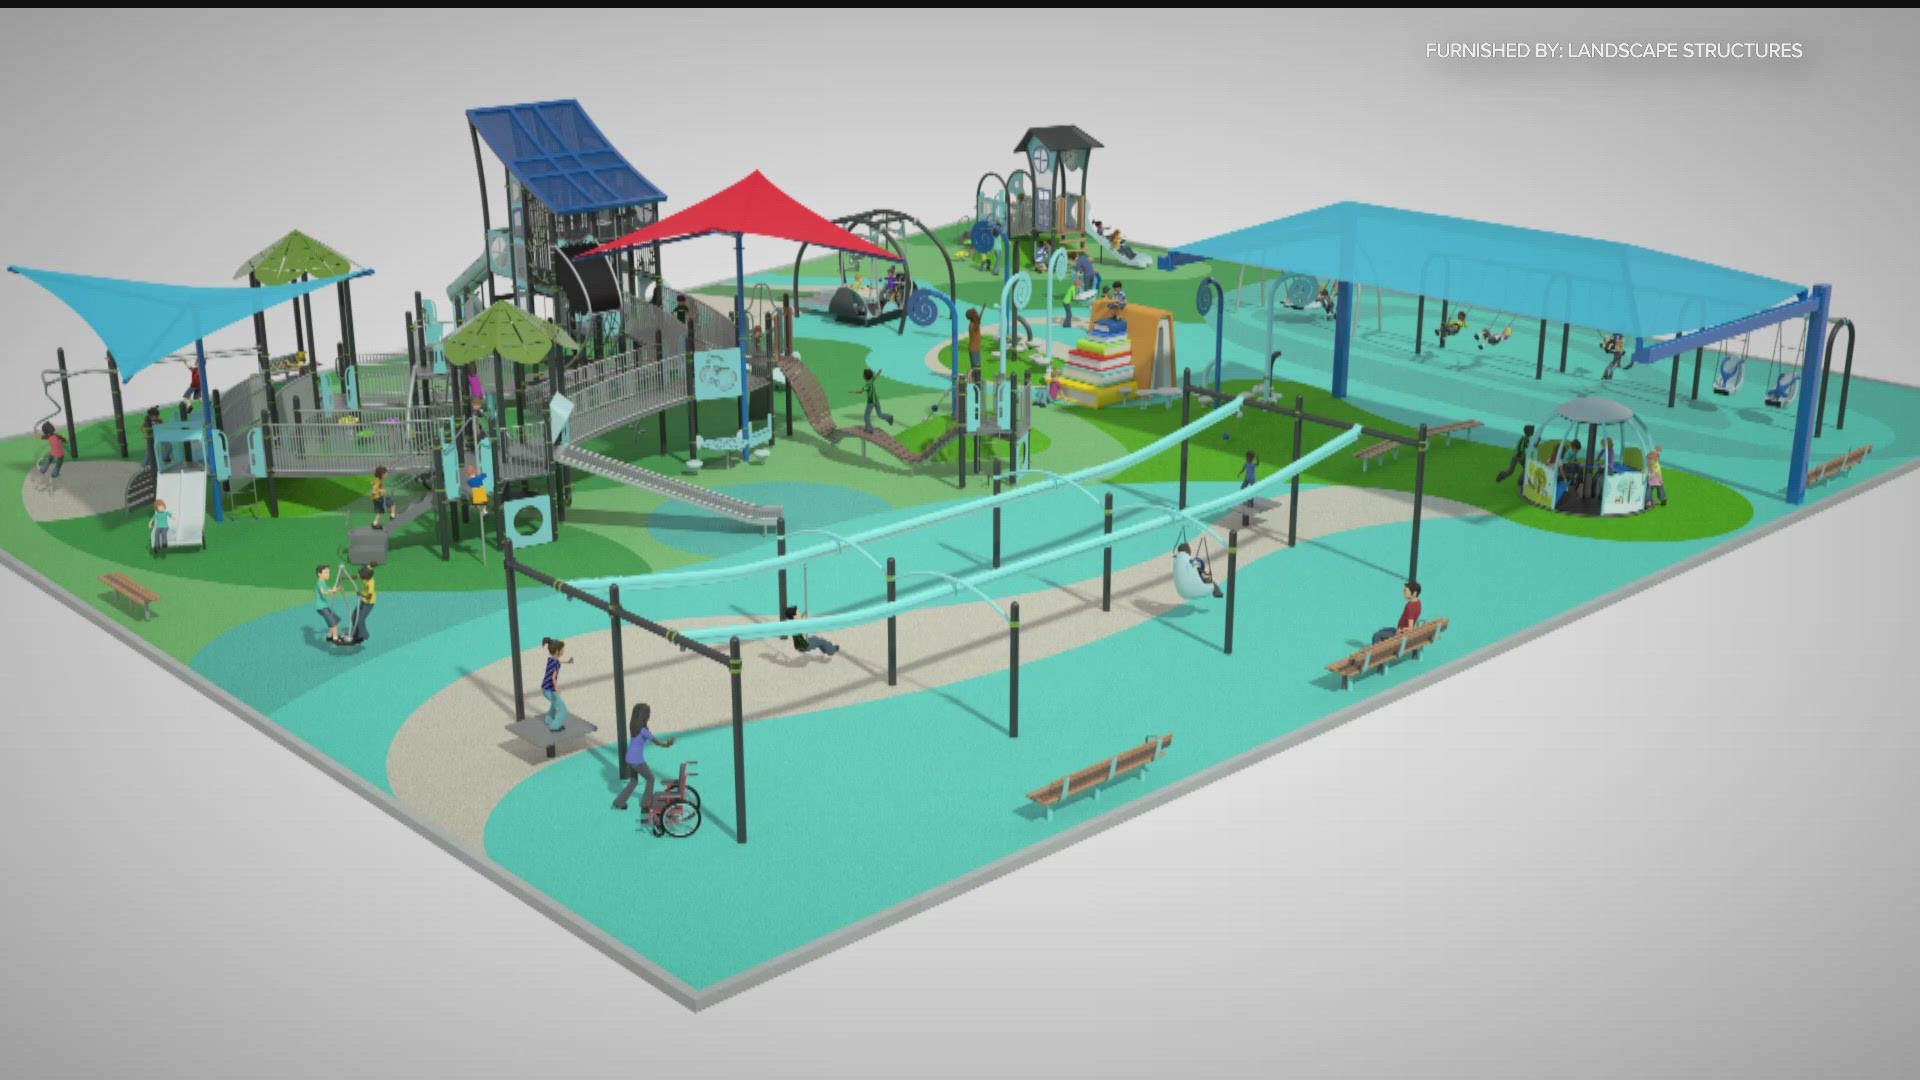 Landscape Structures custom designed the playground that's 16,000 square feet with 25 different types of activities.